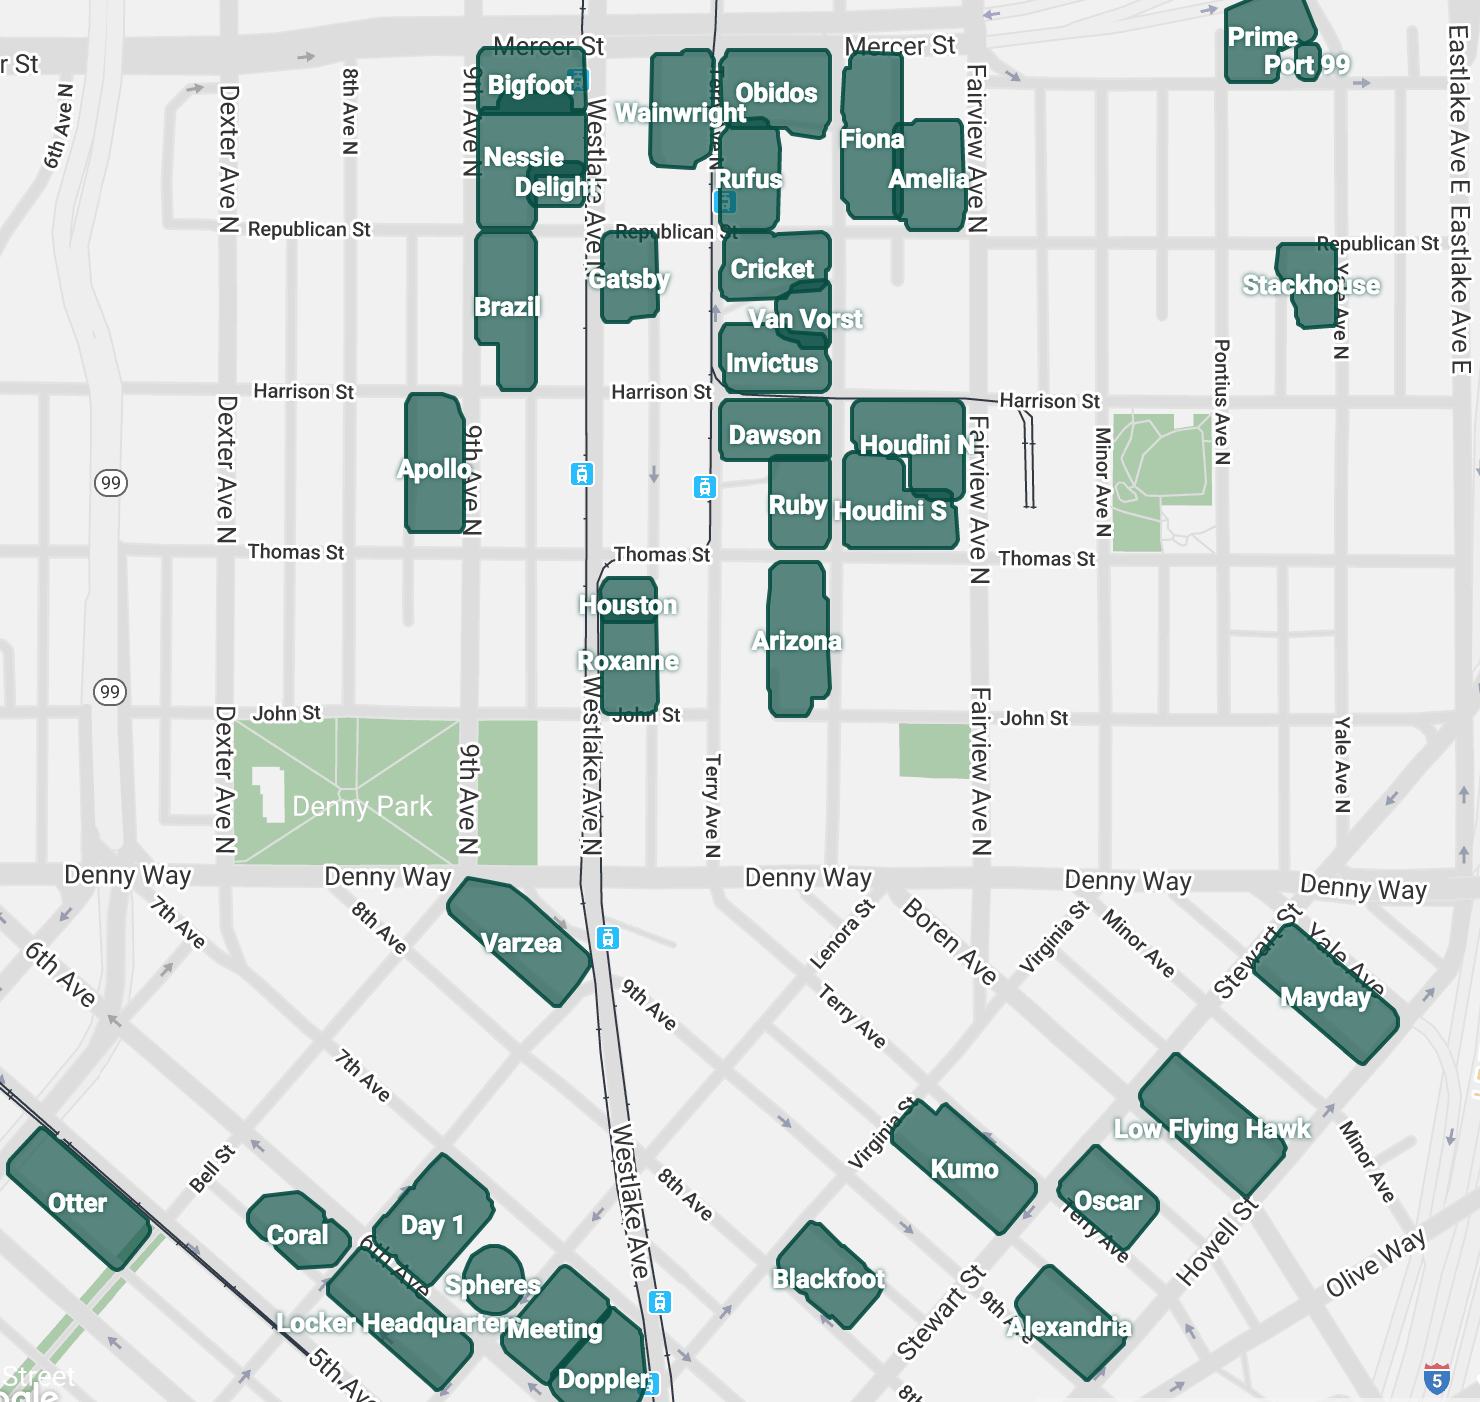 Amazon Seattle Downtown Main Campus map image